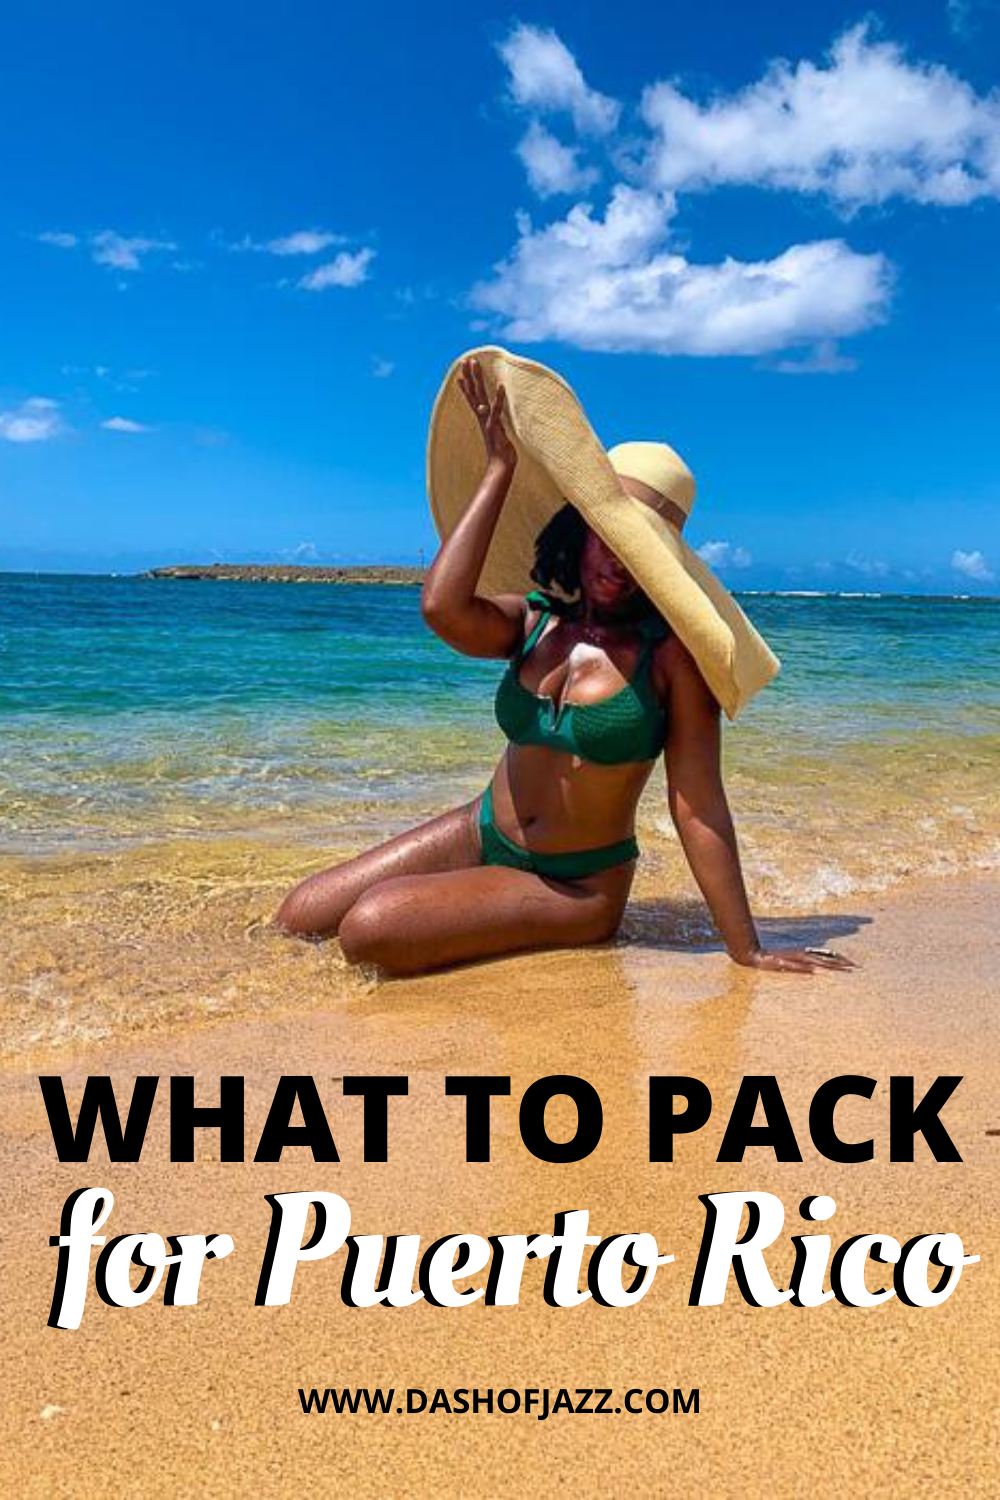 Jazzmine on Escambron Beach with text overlay "what to pack for Puerto Rico"